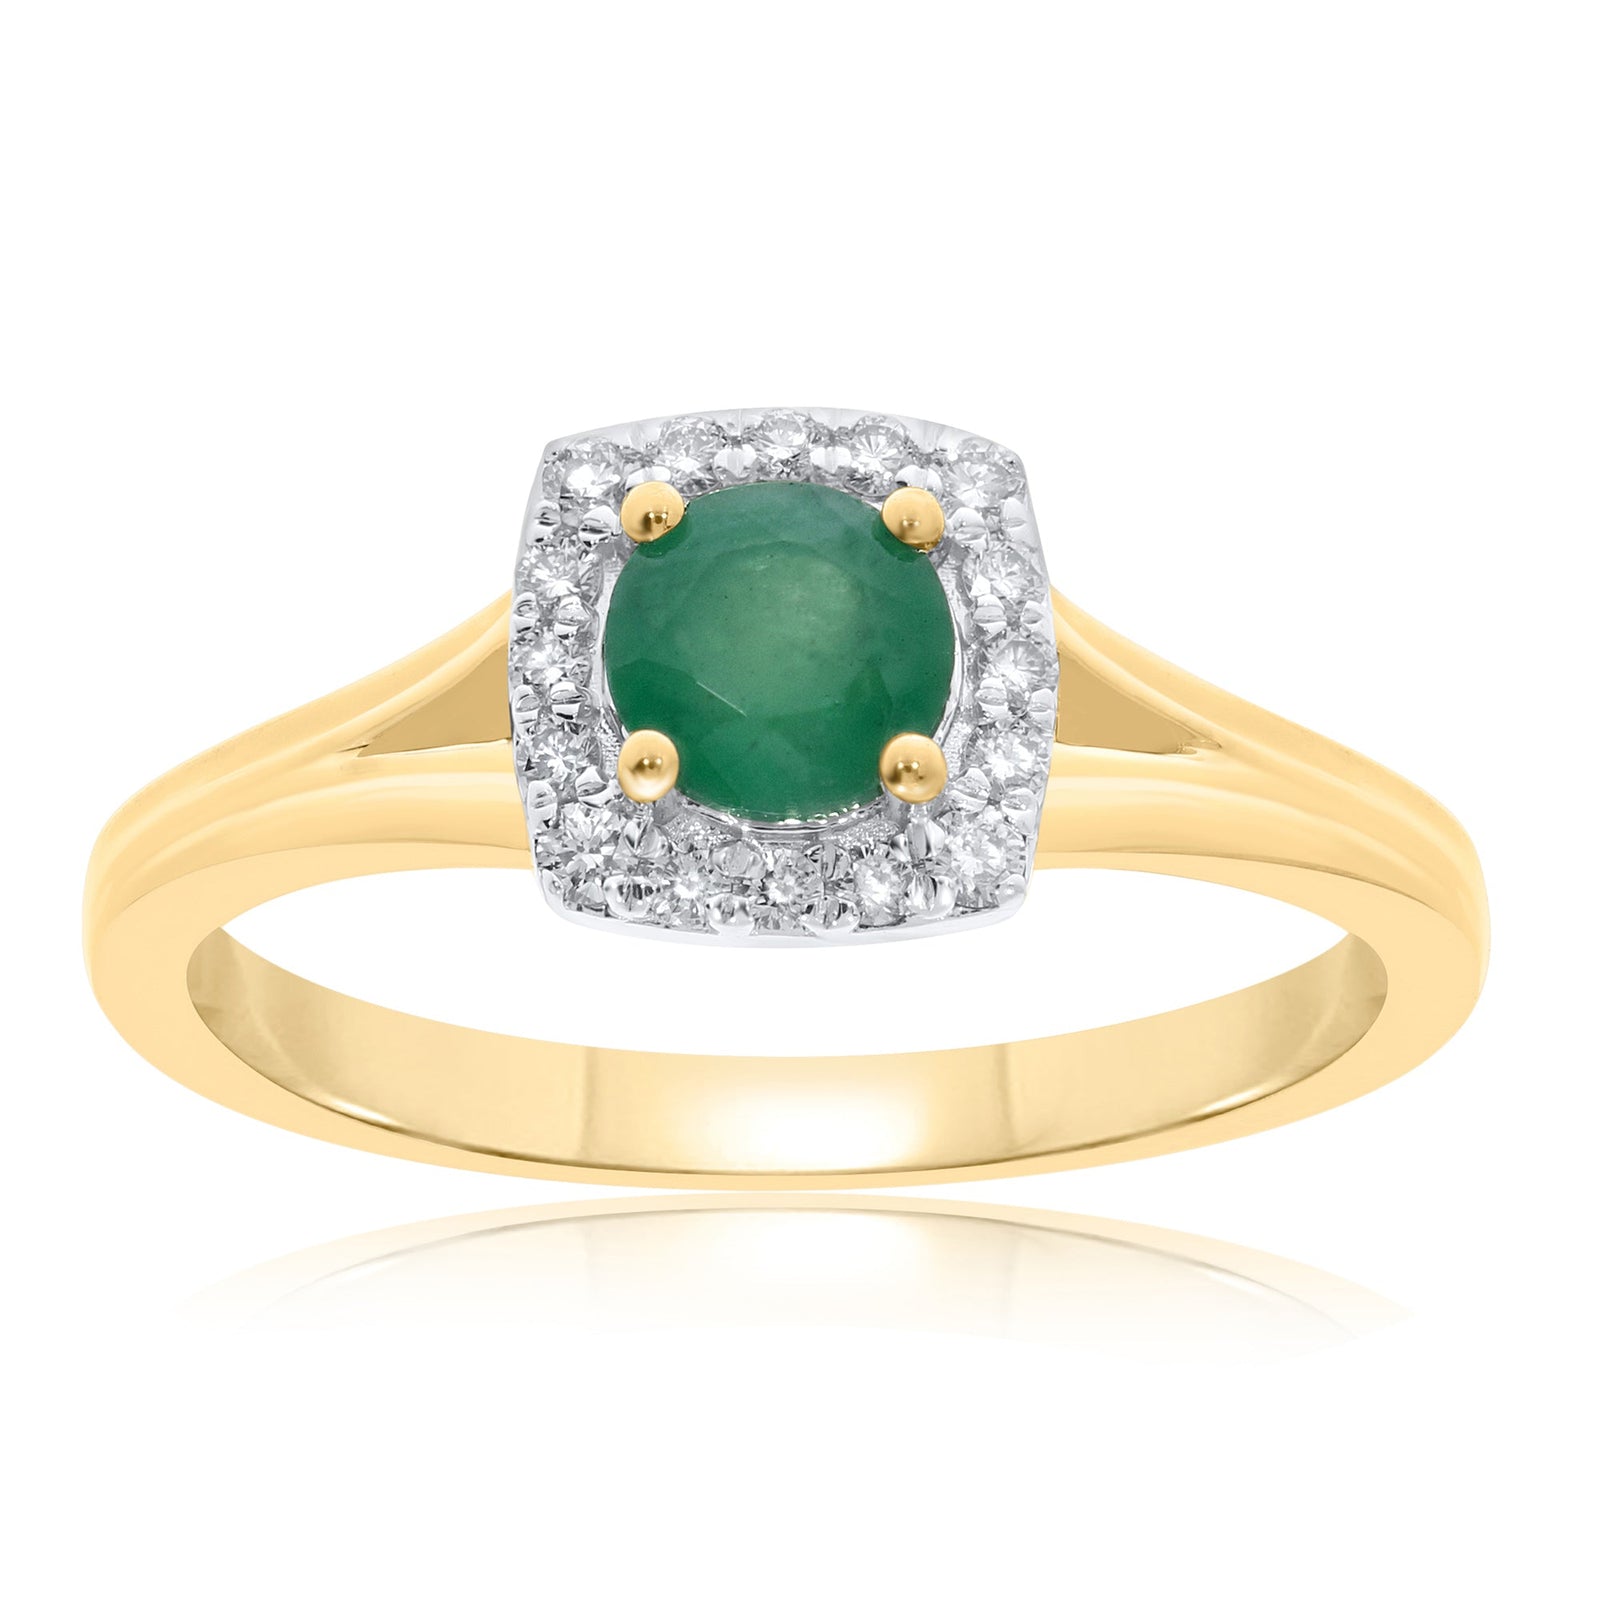 9ct gold 5mm round emerald & diamond cluster ring 0.15ct